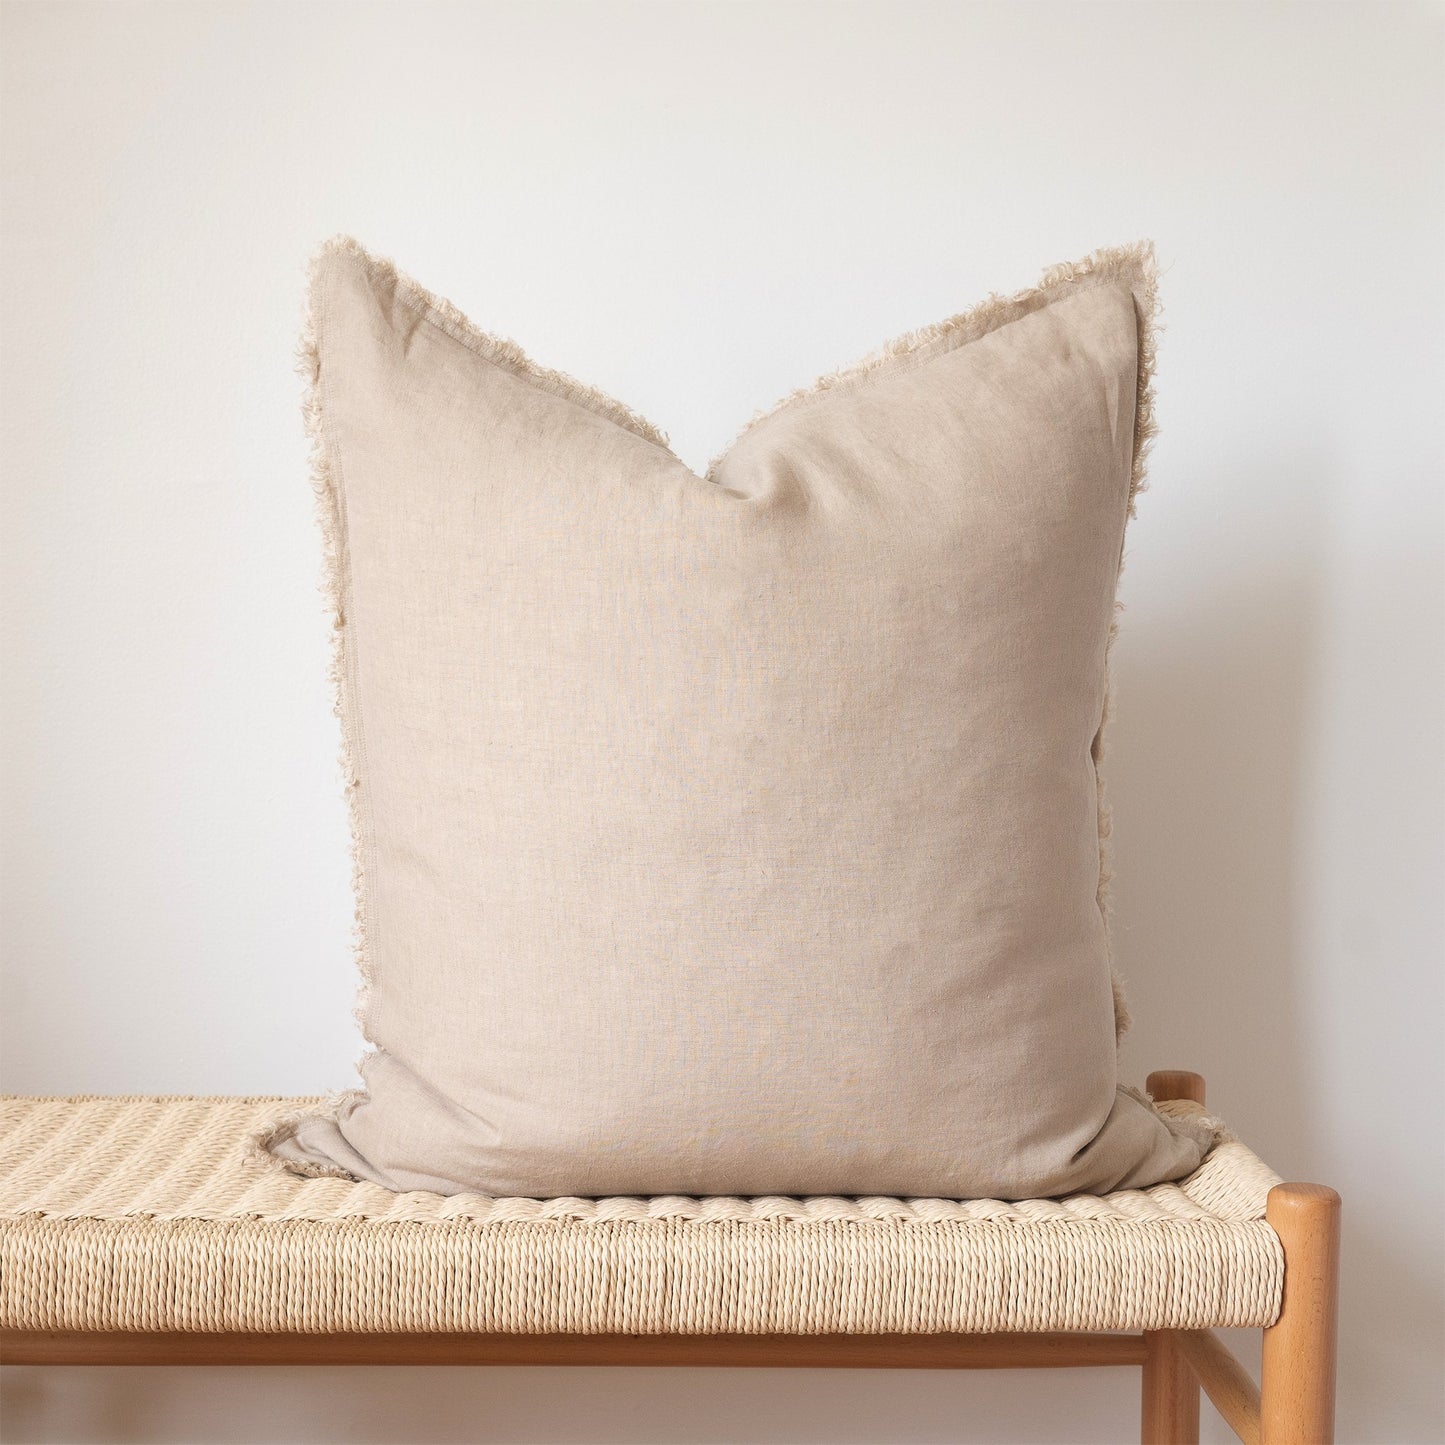 Square Fringed Linen Pillow COVER - Natural